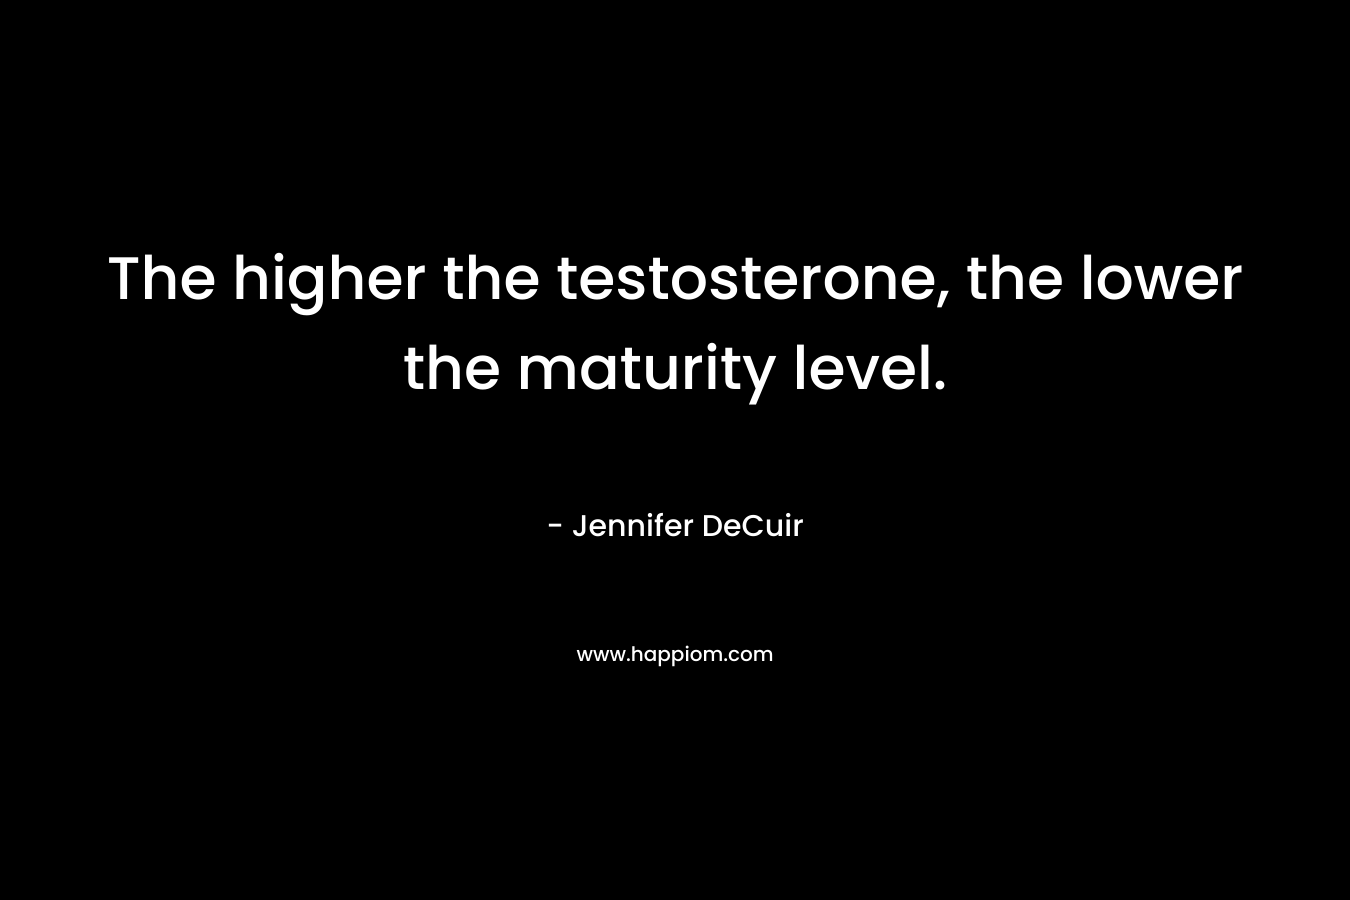 The higher the testosterone, the lower the maturity level. – Jennifer DeCuir